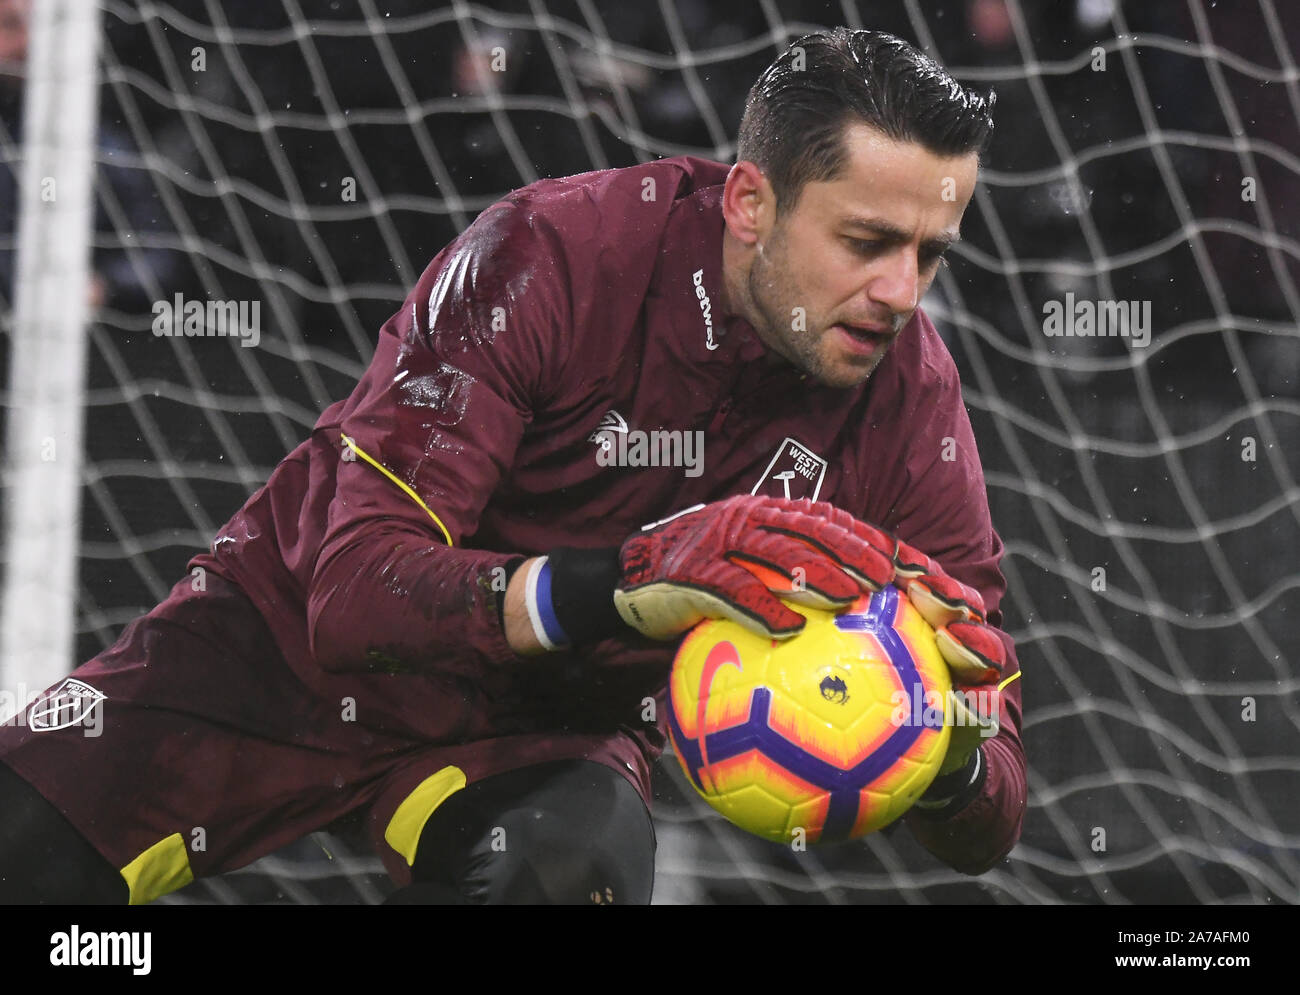 LONDON, ENGLAND - DECEMBER 15, 2018: Lukasz Fabianski of West Ham pictured prior to the 2018/19 Premier League game between Fulham FC and West Ham United at Craven Cottage. Stock Photo